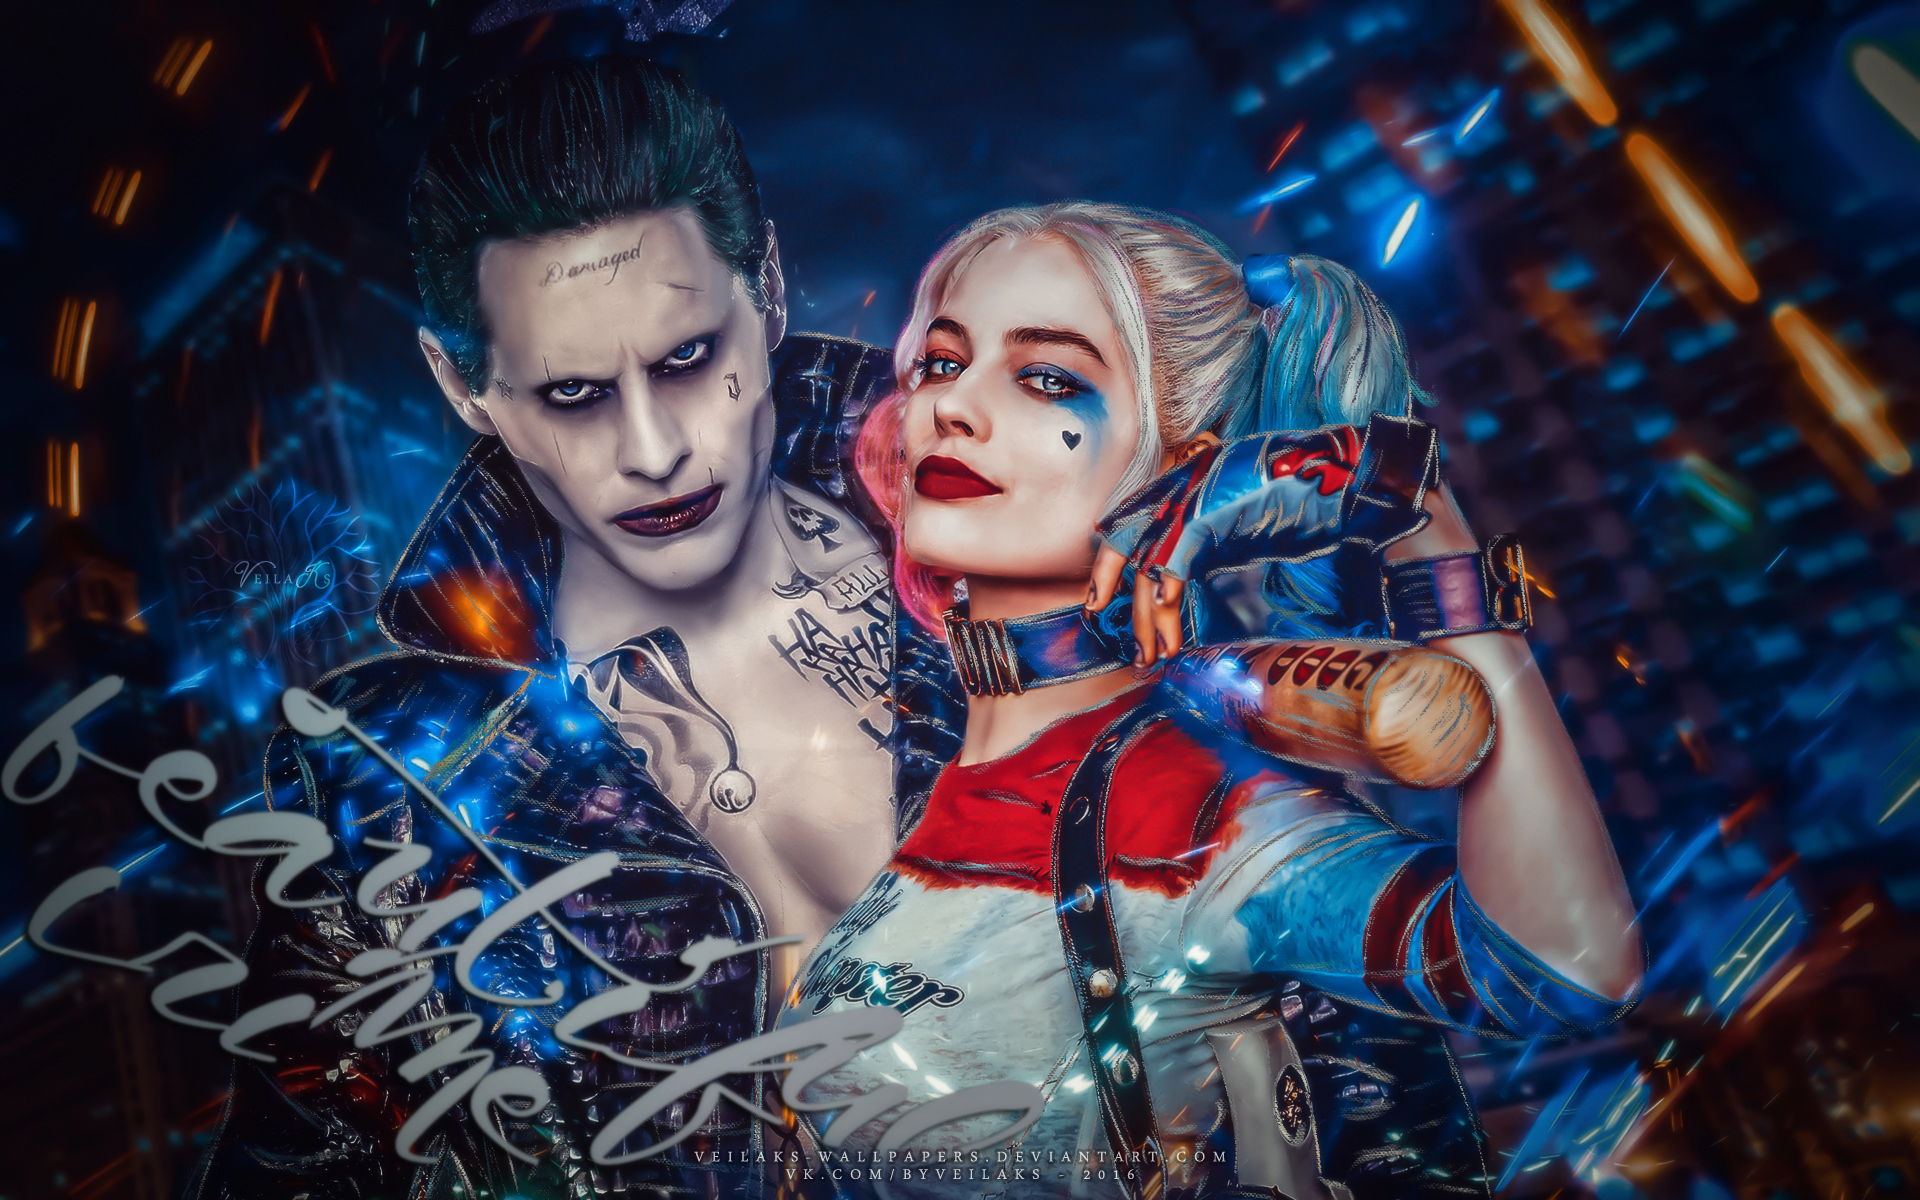 Free HD joker, movie, margot robbie, harley quinn, suicide squad, jared leto, two toned hair